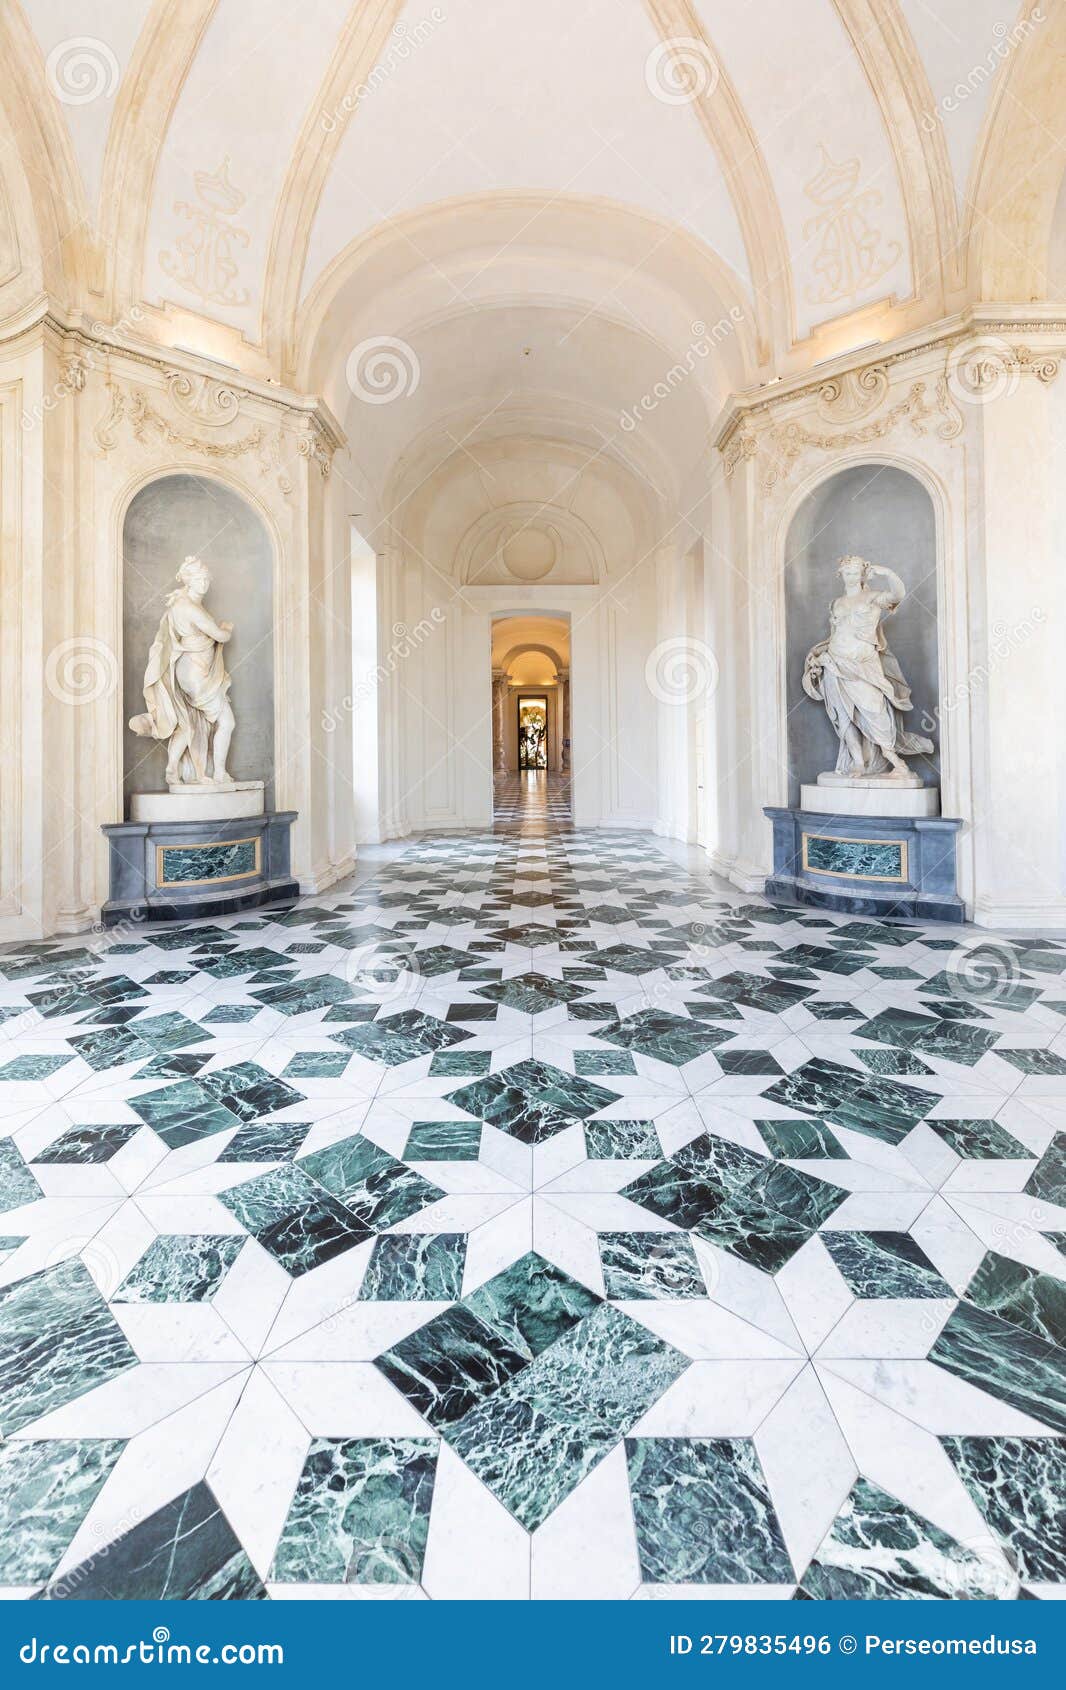 Venaria Reale, Italy - luxury interior old royal palace. Gallery